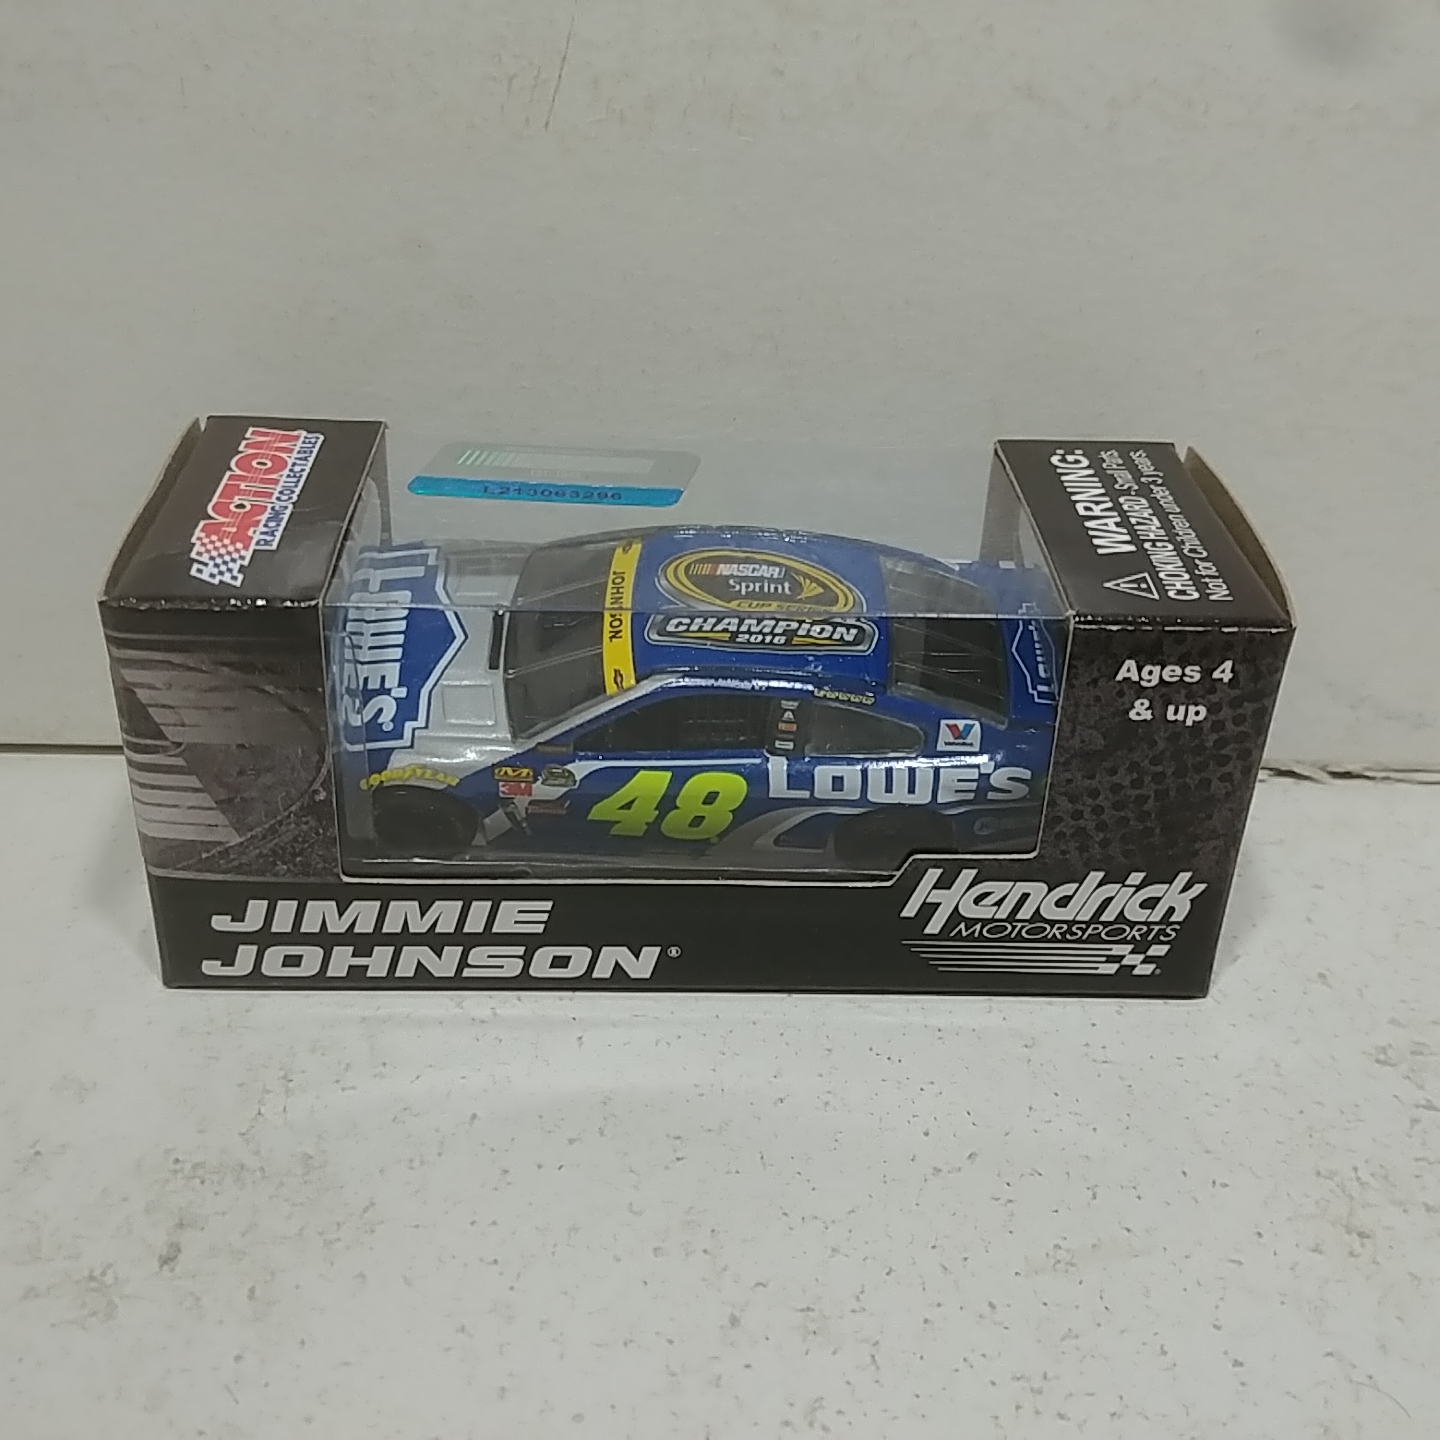 2016 Jimmie Johnson 1/64th Lowe's "7-Time Champion" Pitstop Series Chevrolet SS